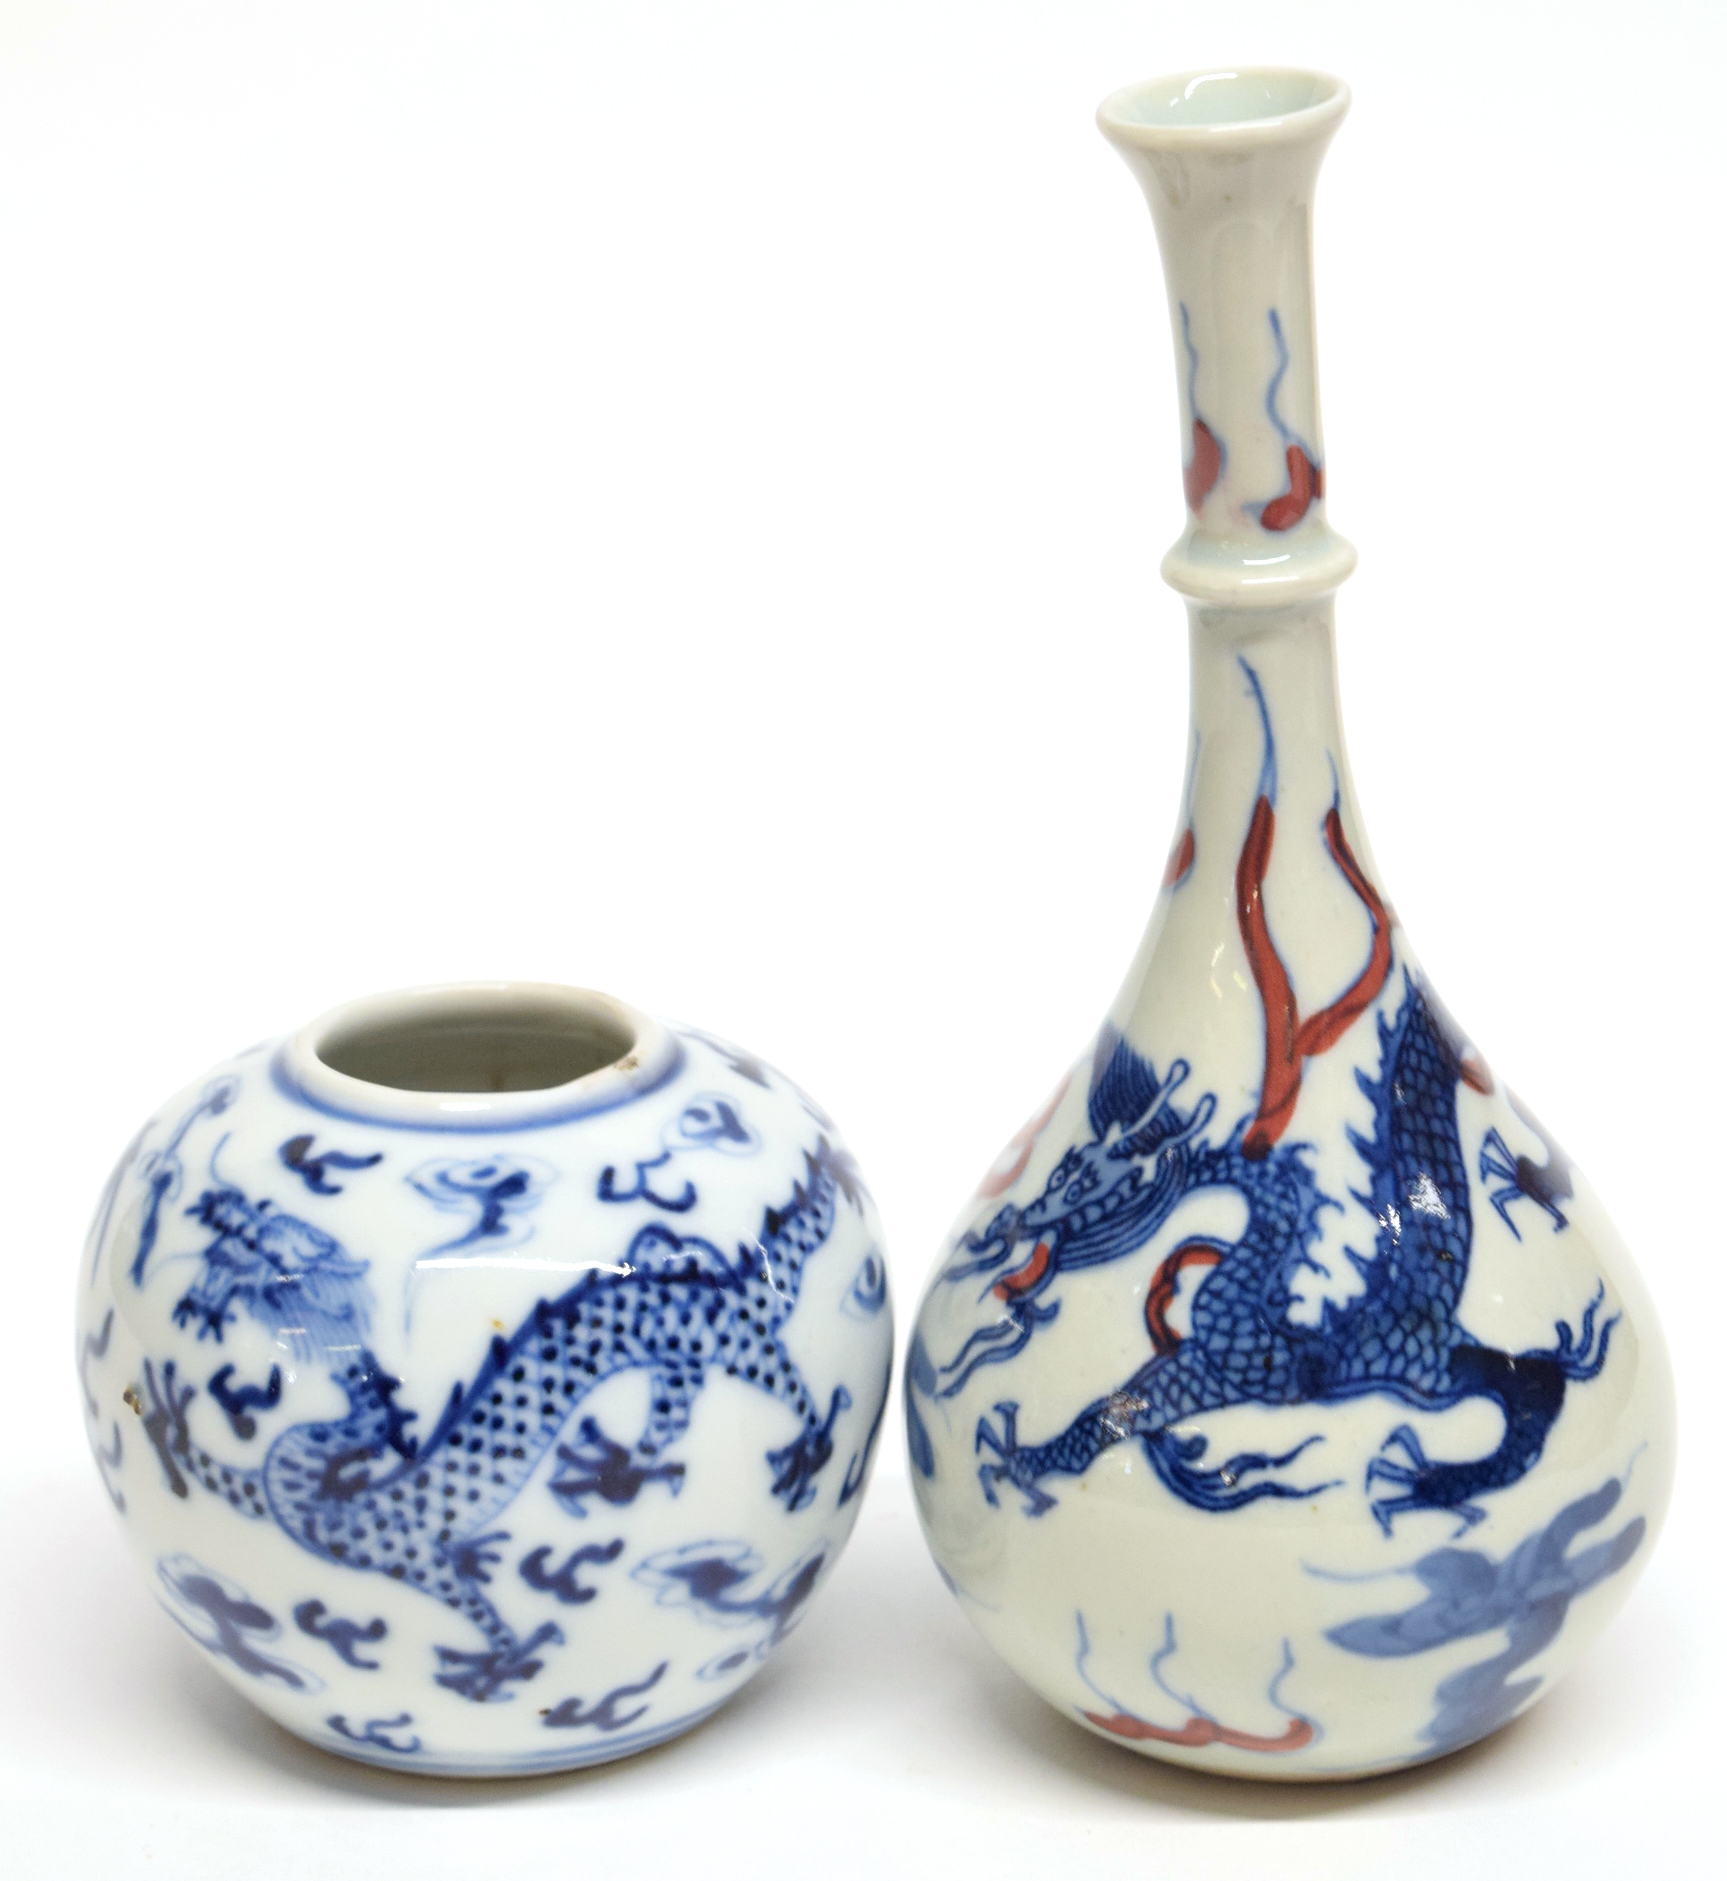 Small Chinese porcelain globular vase decorated with a dragon chasing the flaming pearl, together